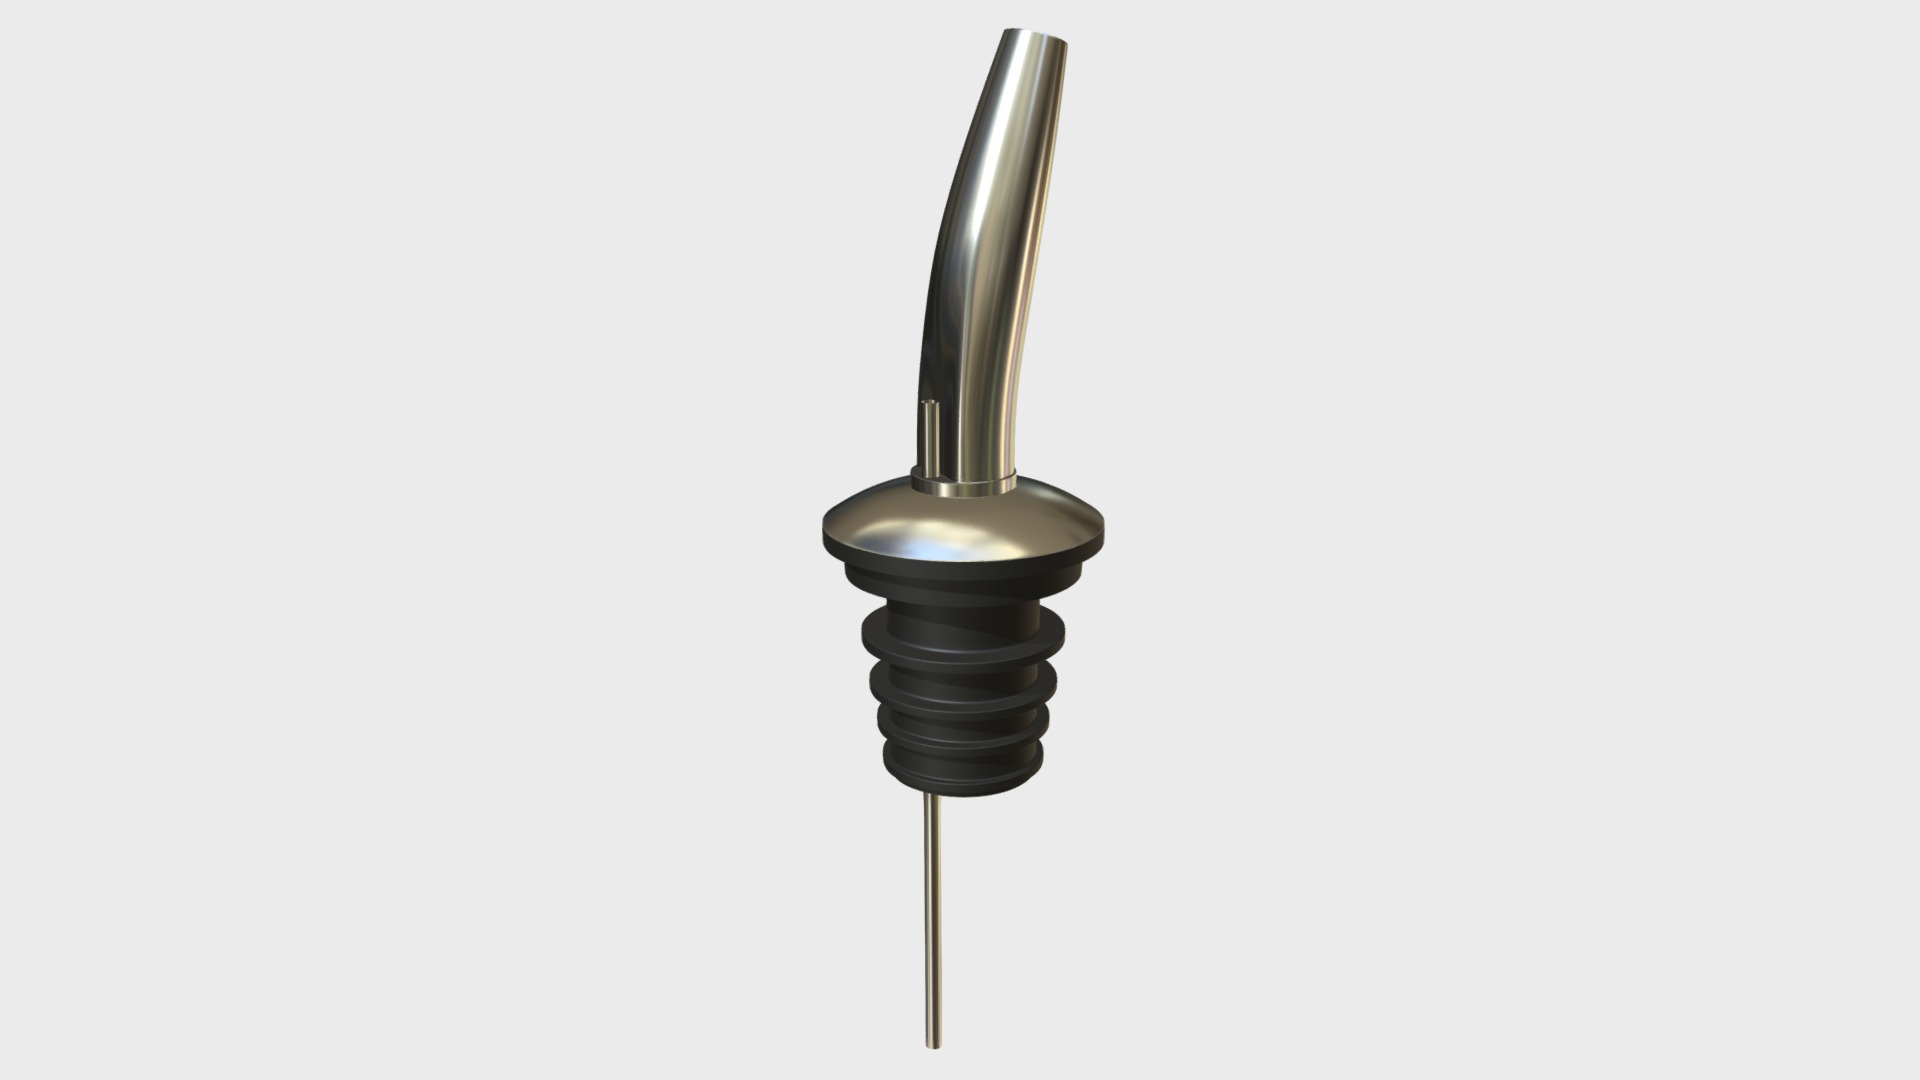 3D model Liquor bottle pouring spout - This is a 3D model of the Liquor bottle pouring spout. The 3D model is about a black and silver lamp.